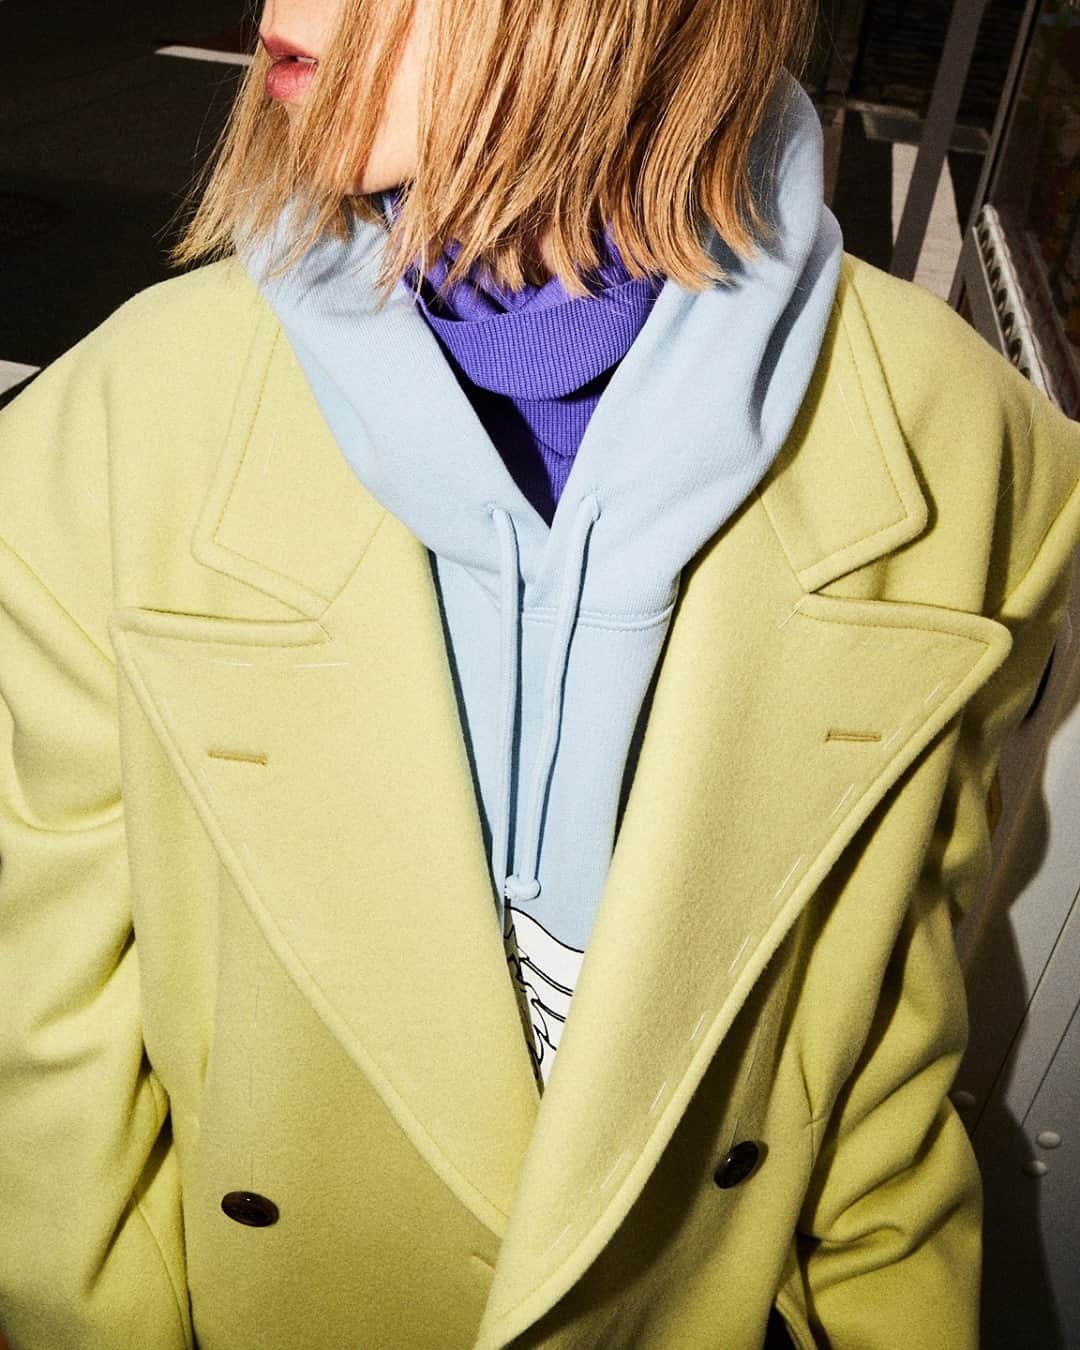 ADELAIDEのインスタグラム：「🌈Brighten up your winter day🌈⁠ ⁠ Get winter styles ON SALE⁠ ⁠ Online or Instore⁠ ⁠ Coat #Margiela⁠ Unicorn Hoodie #Vetements⁠ Purple turtle neck #Iroto⁠ ⁠ ⁠ #selectshop_adelaide #autumn #autumnwinter #fashion #style #ootd #outfit #instagood #instastyle #fashionphoto #秋＃スタイル⁠ ⁠ ⁠」